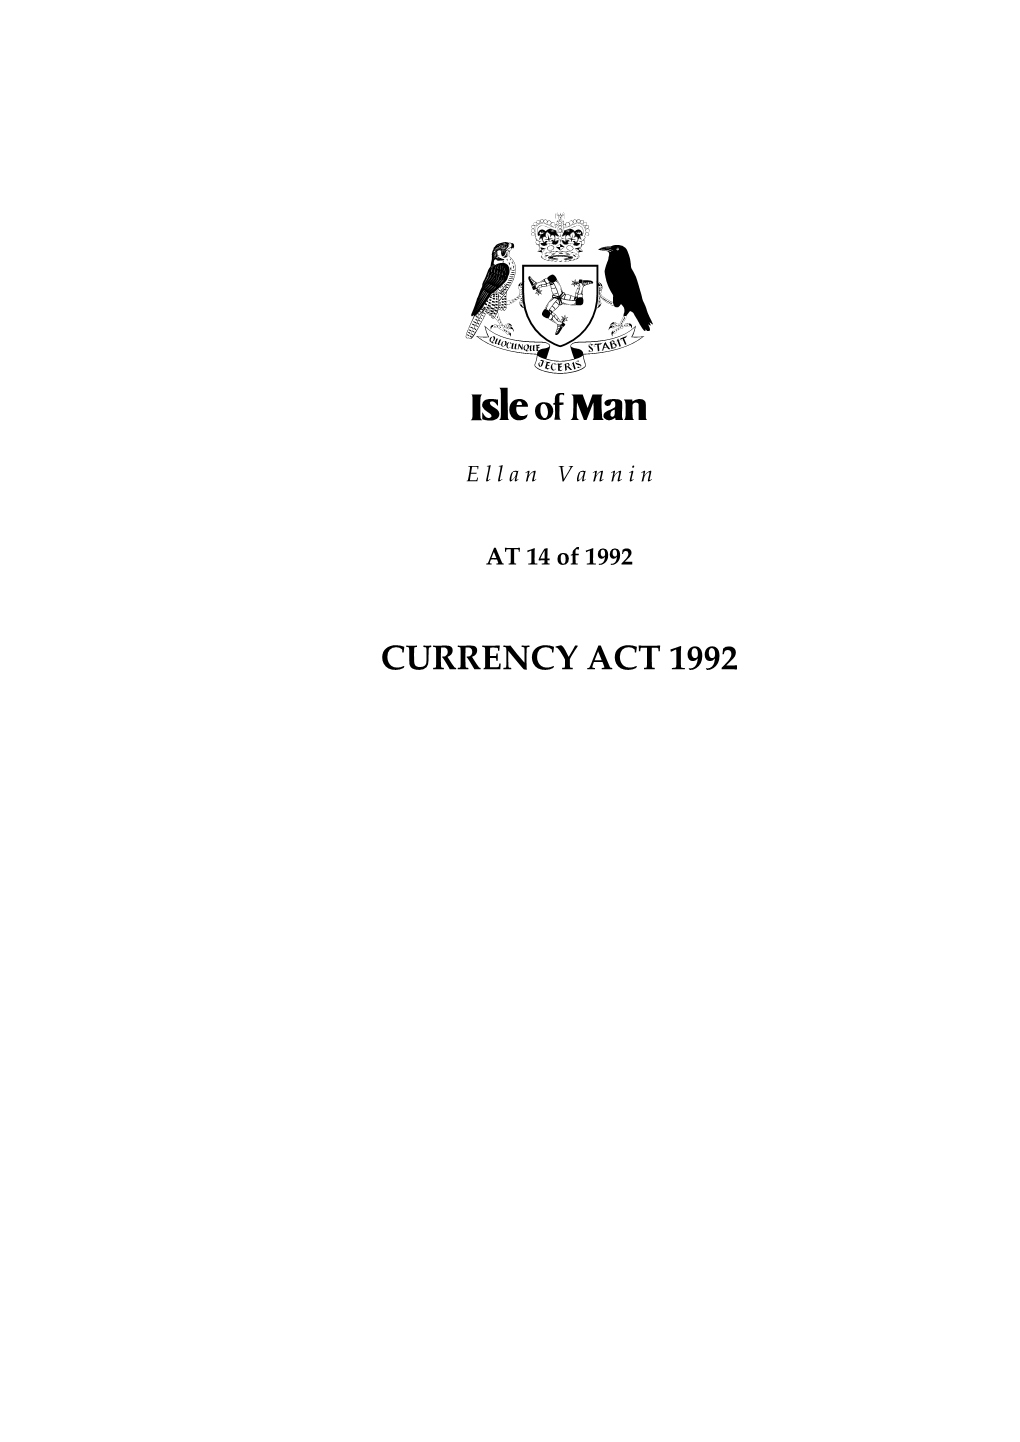 Currency Act 1992